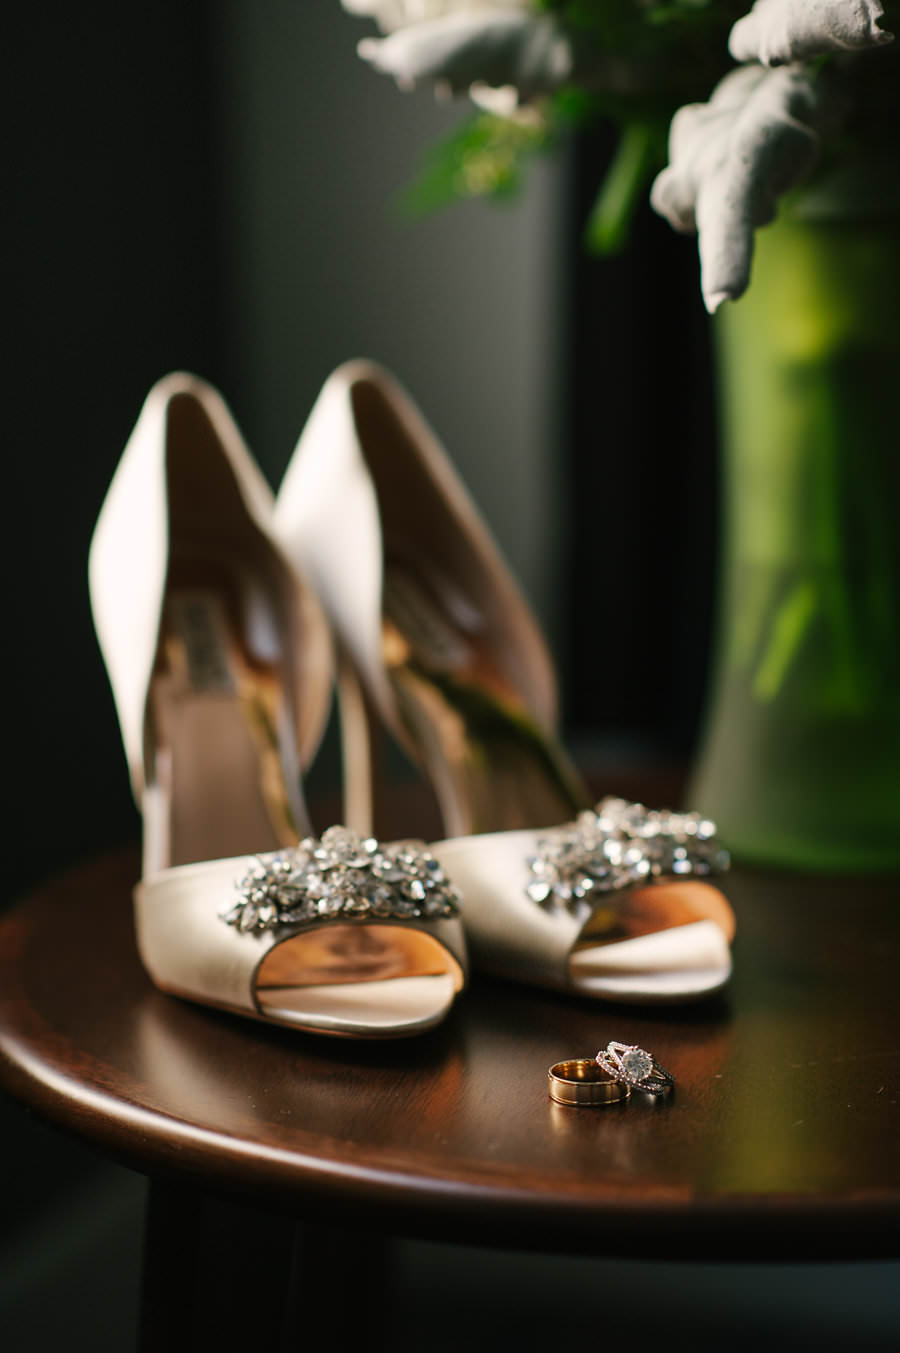 Bridal Champagne Open Toed Wedding Shoes with Rhinestone Brooch and Wedding/Engagement Ring Portrait